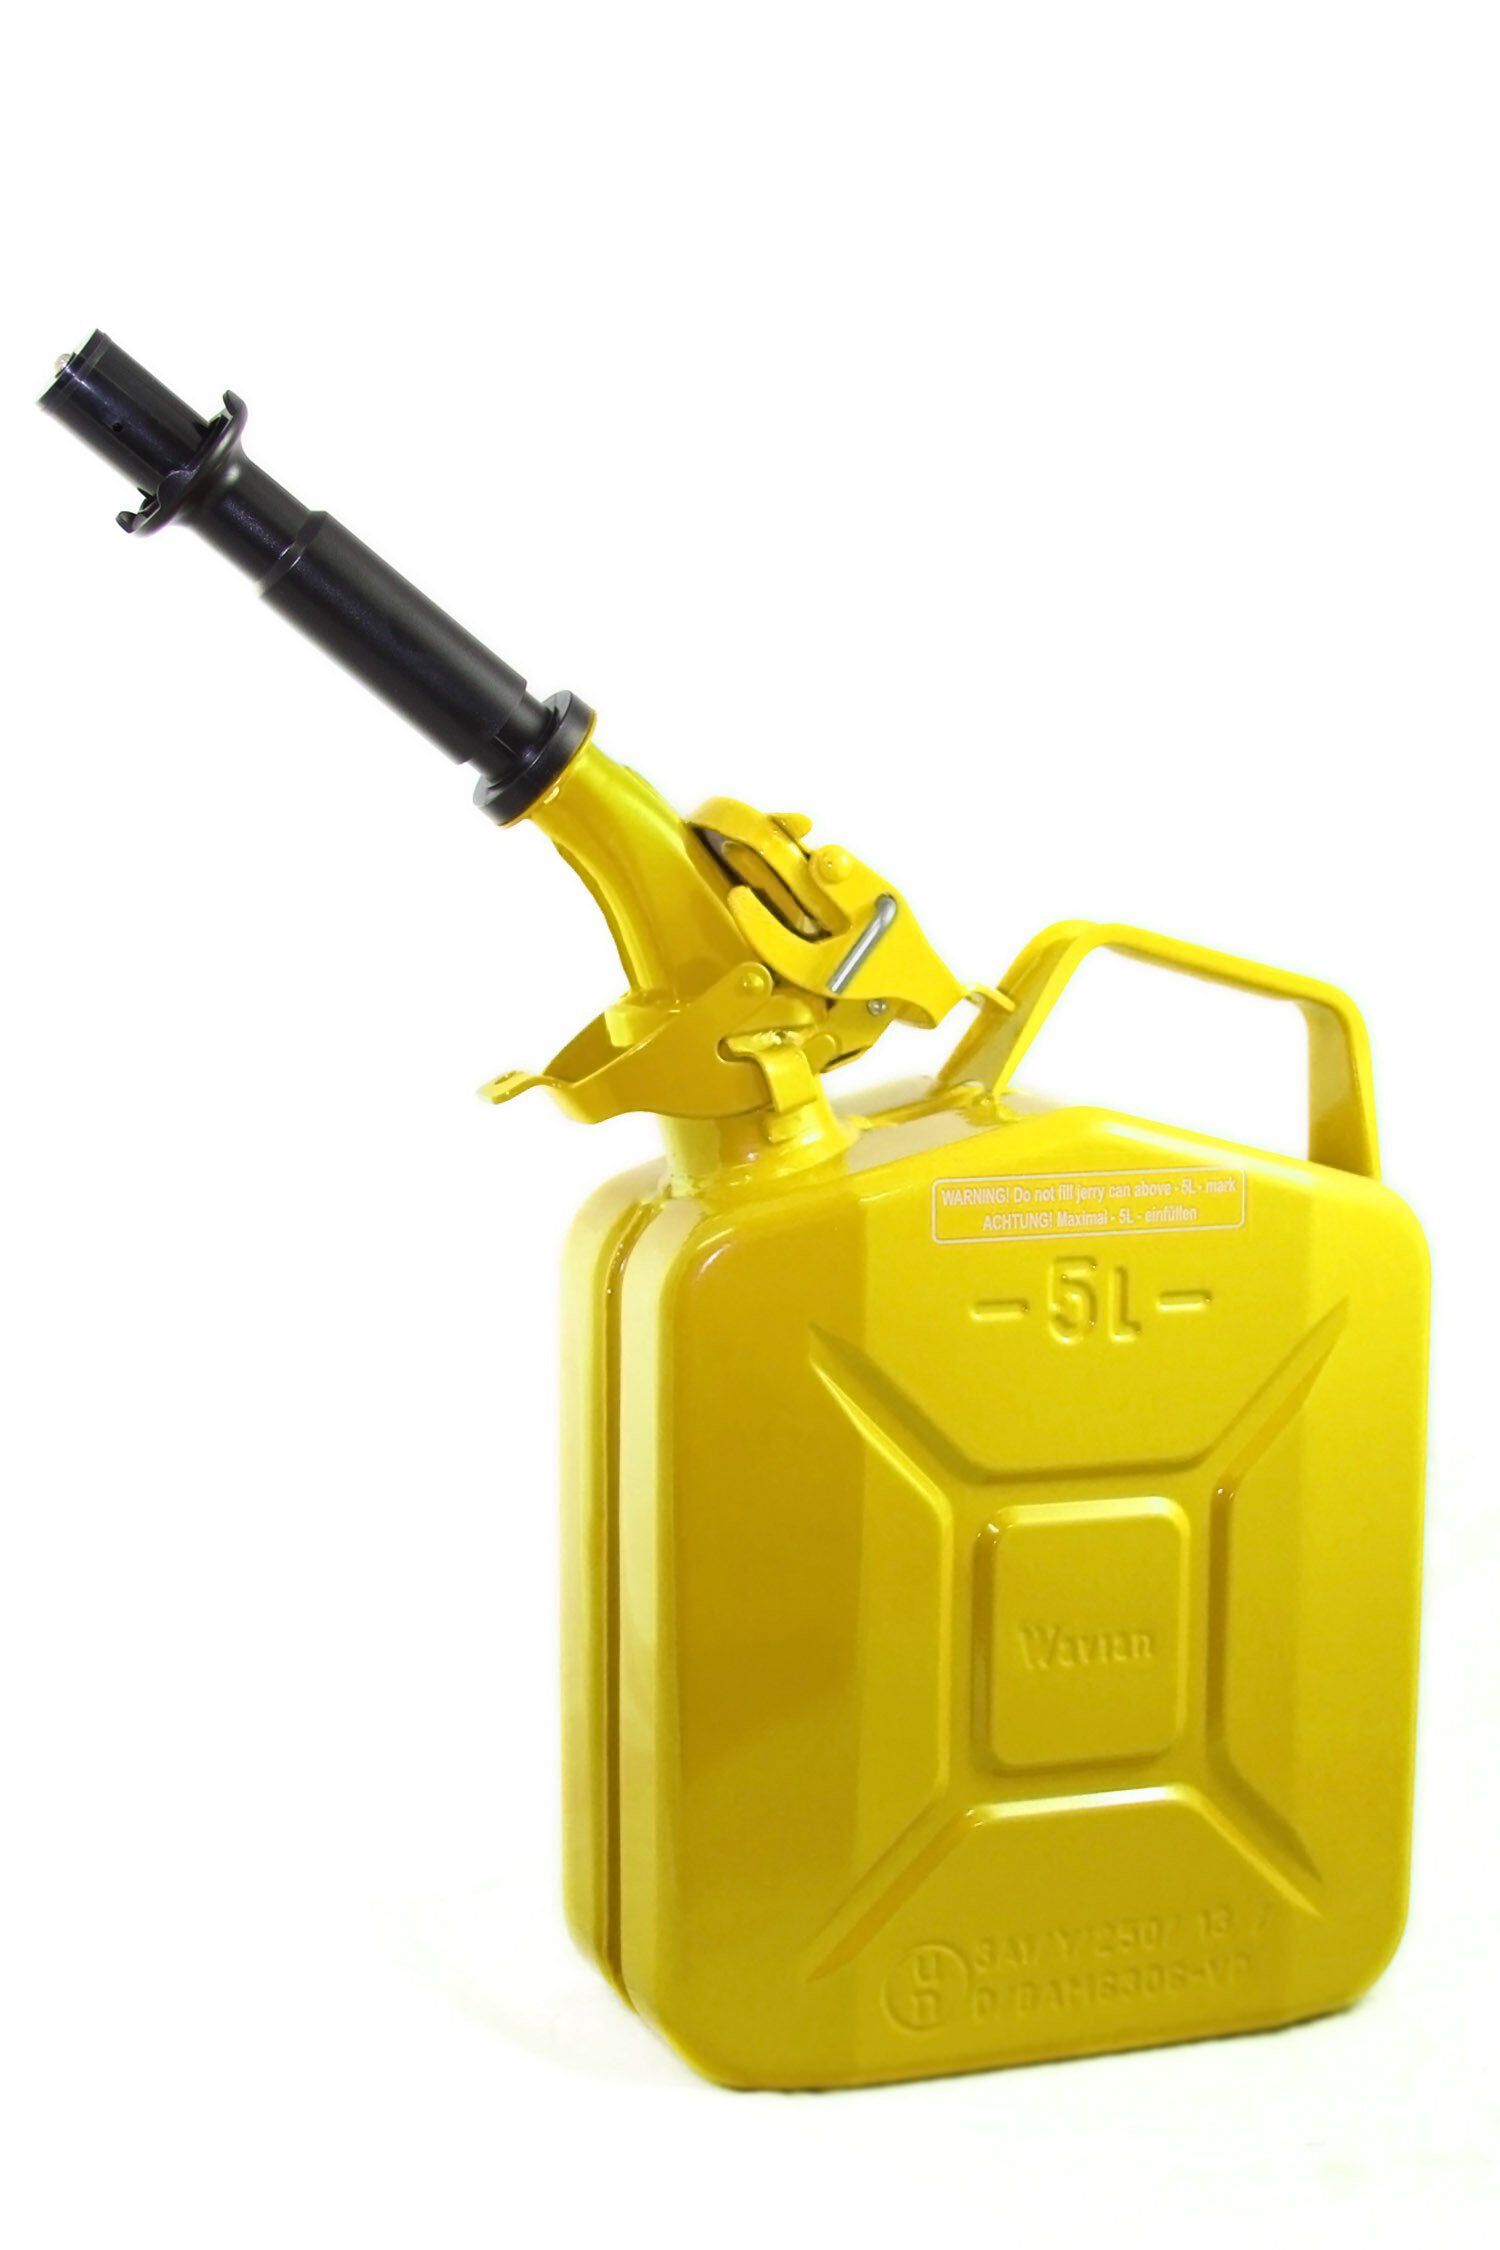 Wavian Fuel Cans | The Finest Steel Jerry Cans In The World